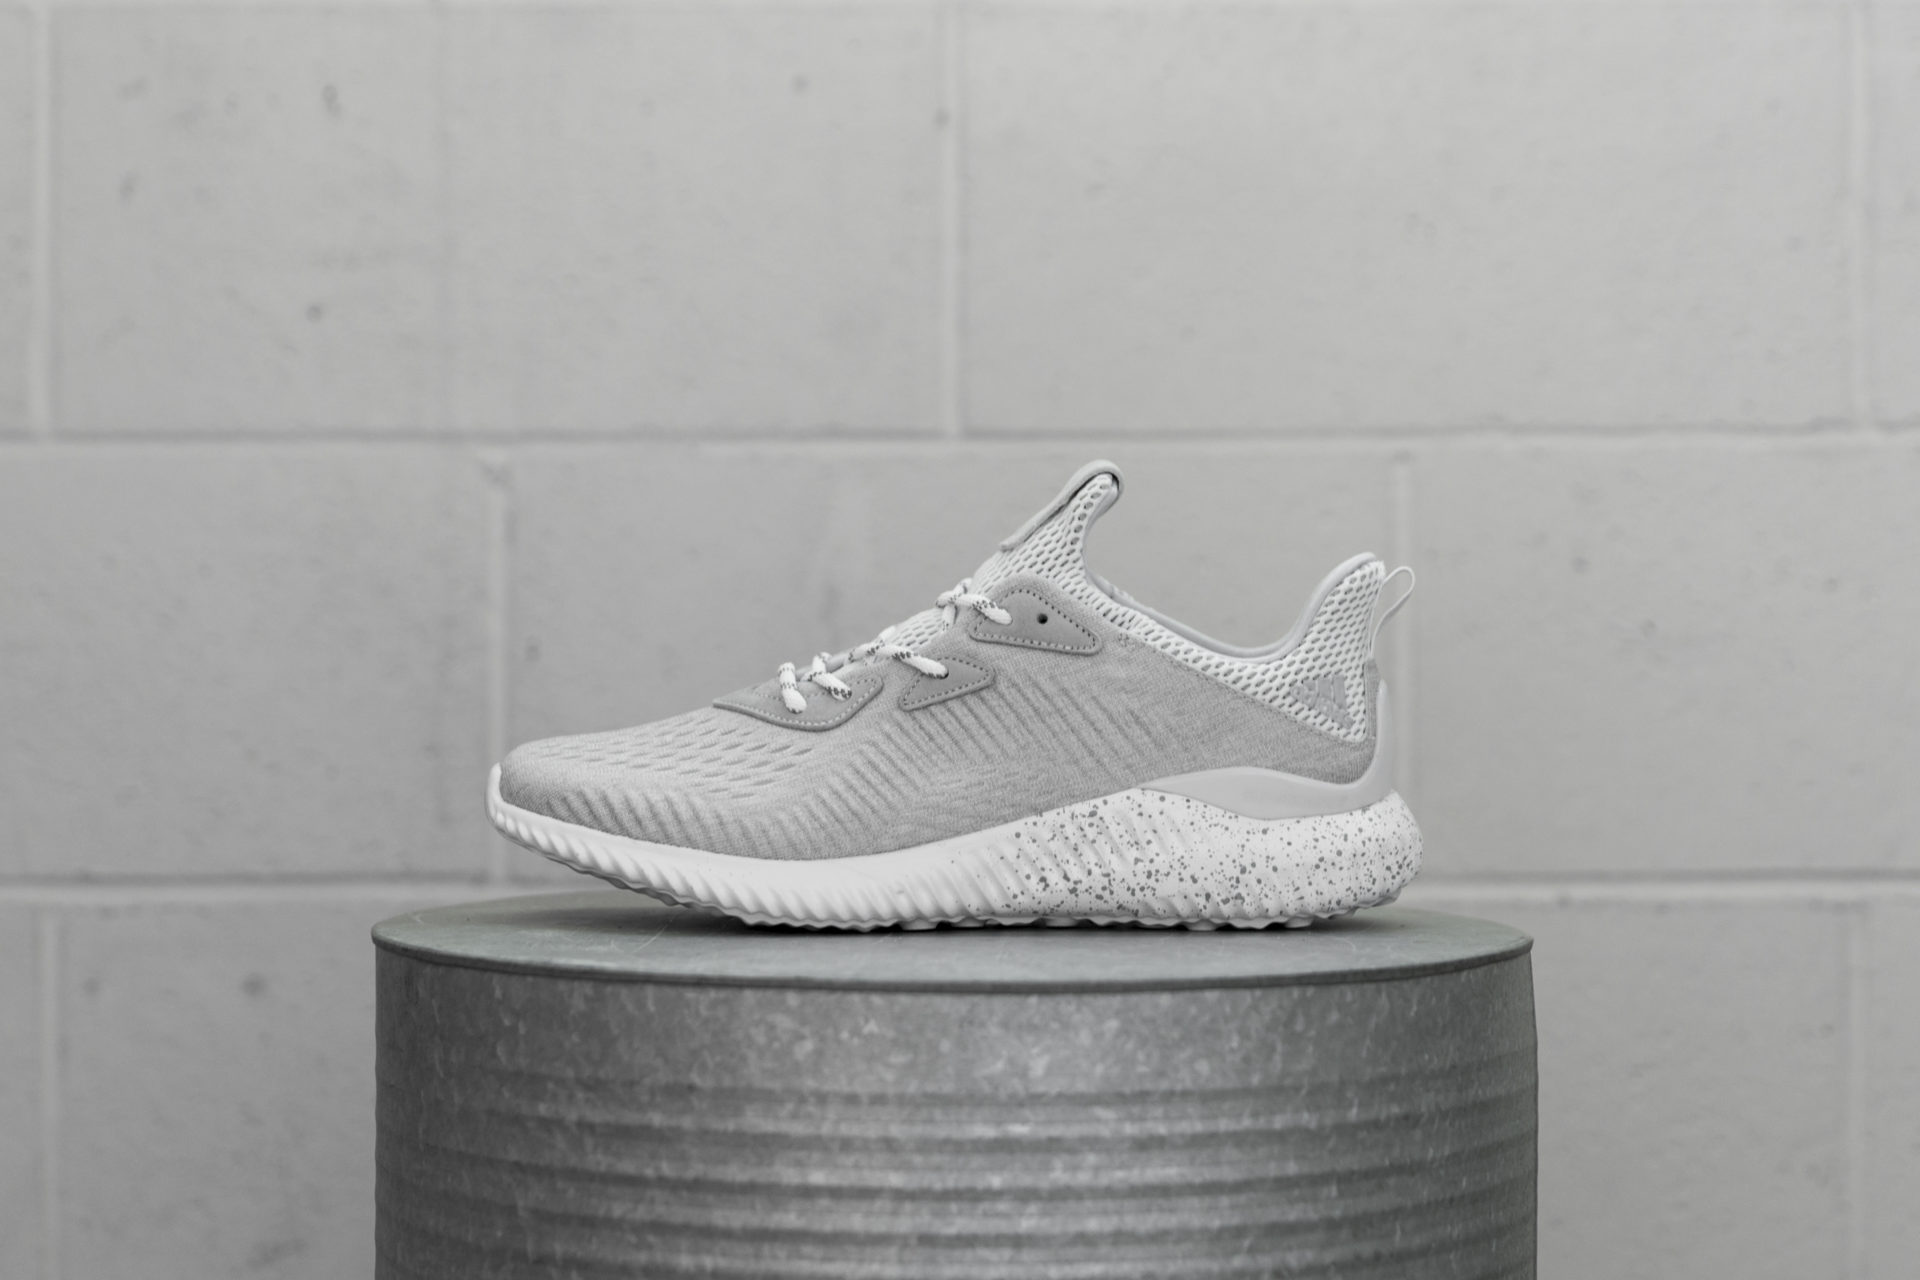 Reigning Champ x adidas Alphabounce